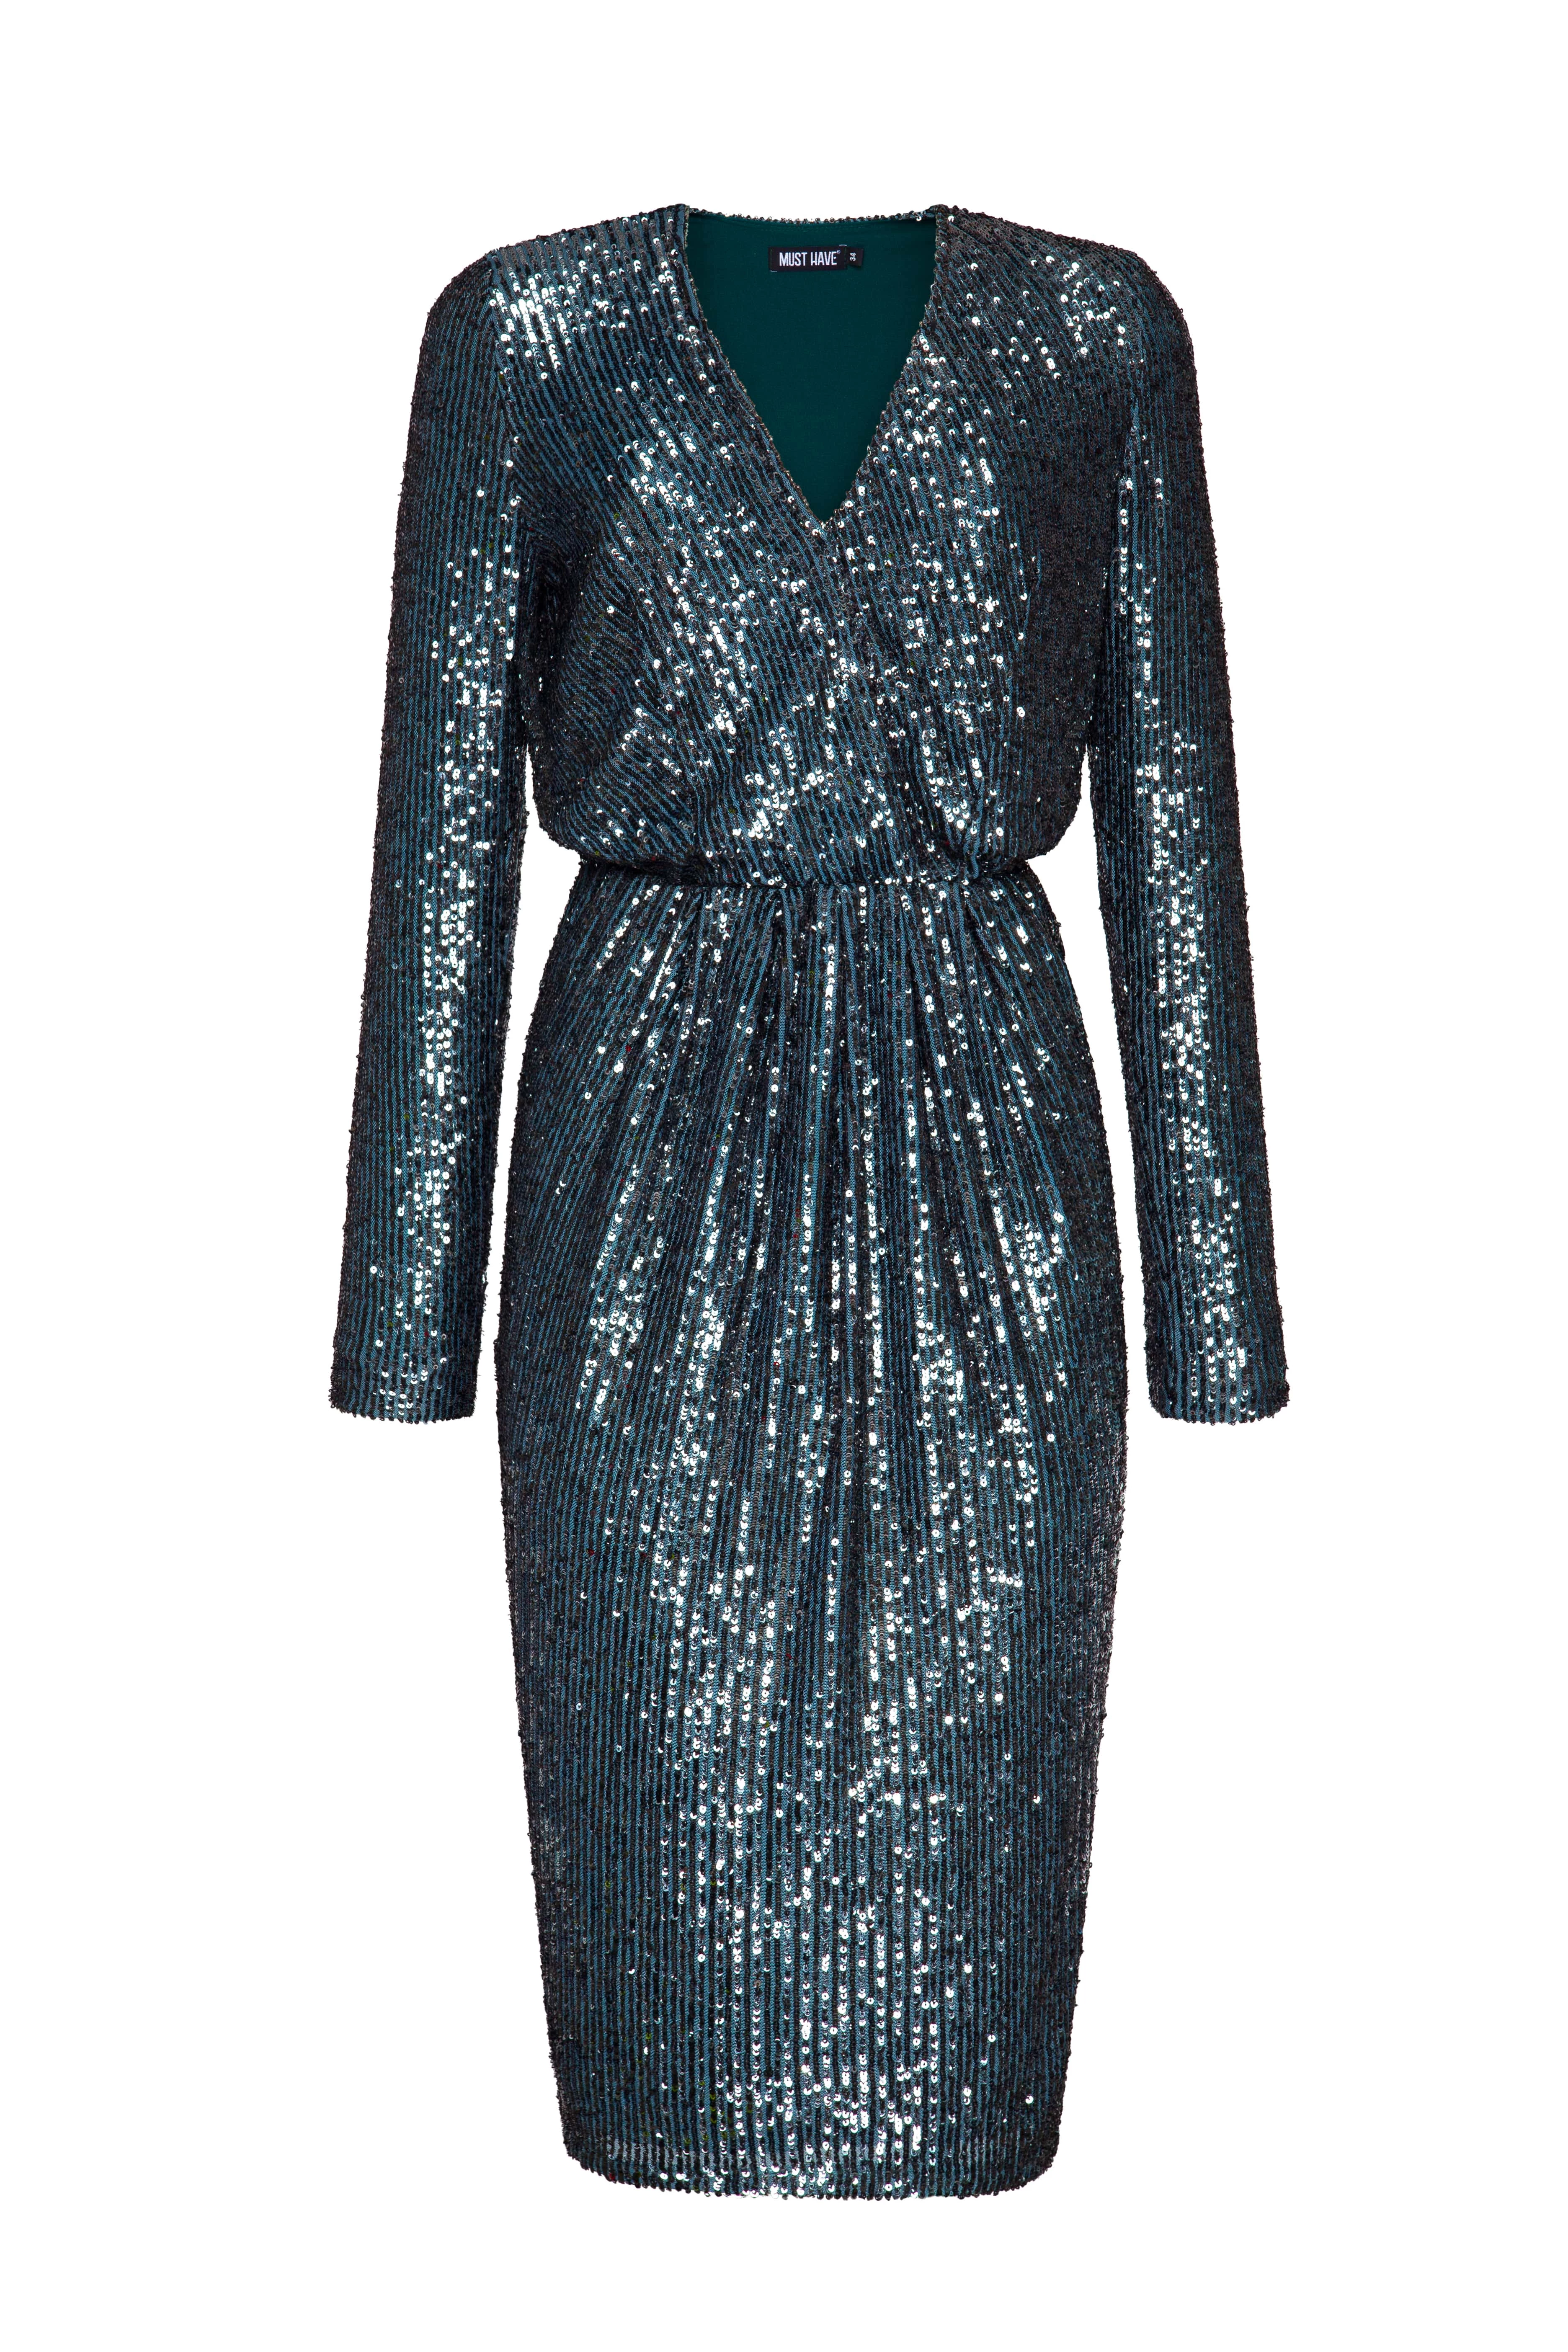 Emerald sequin dress with V-neck below the knee, photo 6